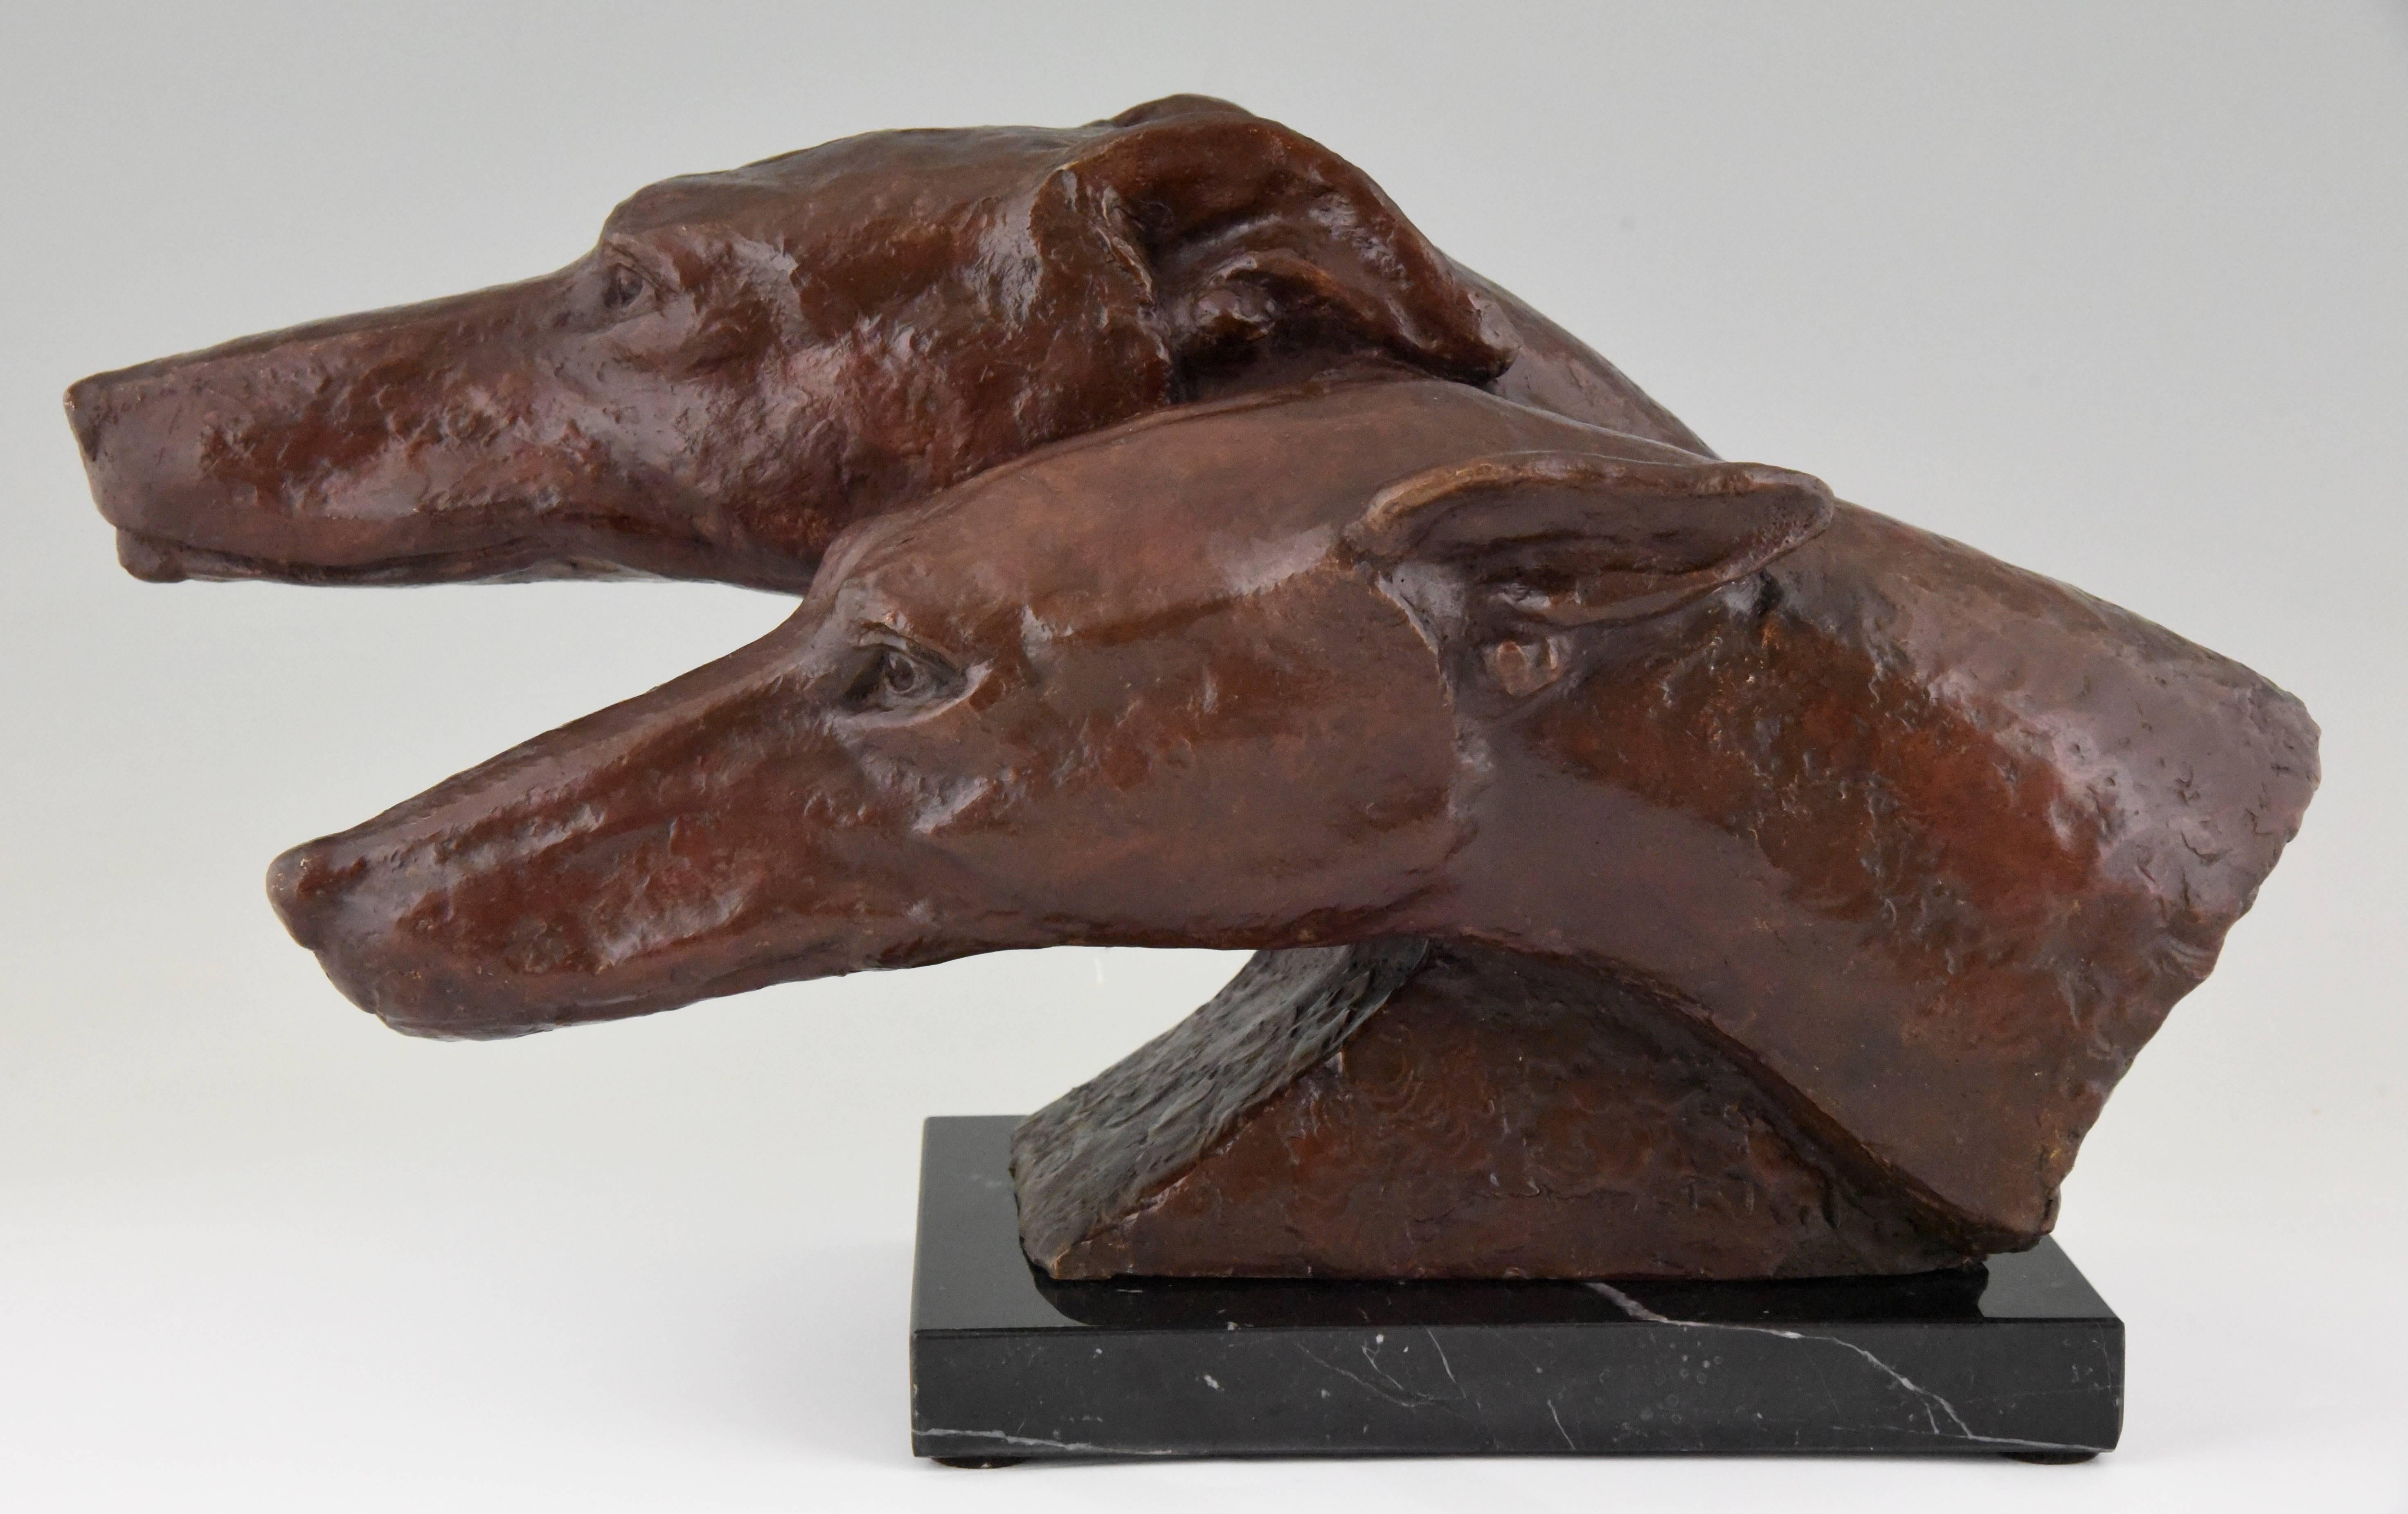 Very nice sculpture of a pair of bronze whippet dogs or Greyhounds. 

Signature/ marks: Indistinct signature.
Style: Art Deco.
Date: 1930.
Material: Patinated bronze. Marble base.
Origin: France
Size: H. 28 cm x L. 50 cm. x W. 25 cm.
H. 11